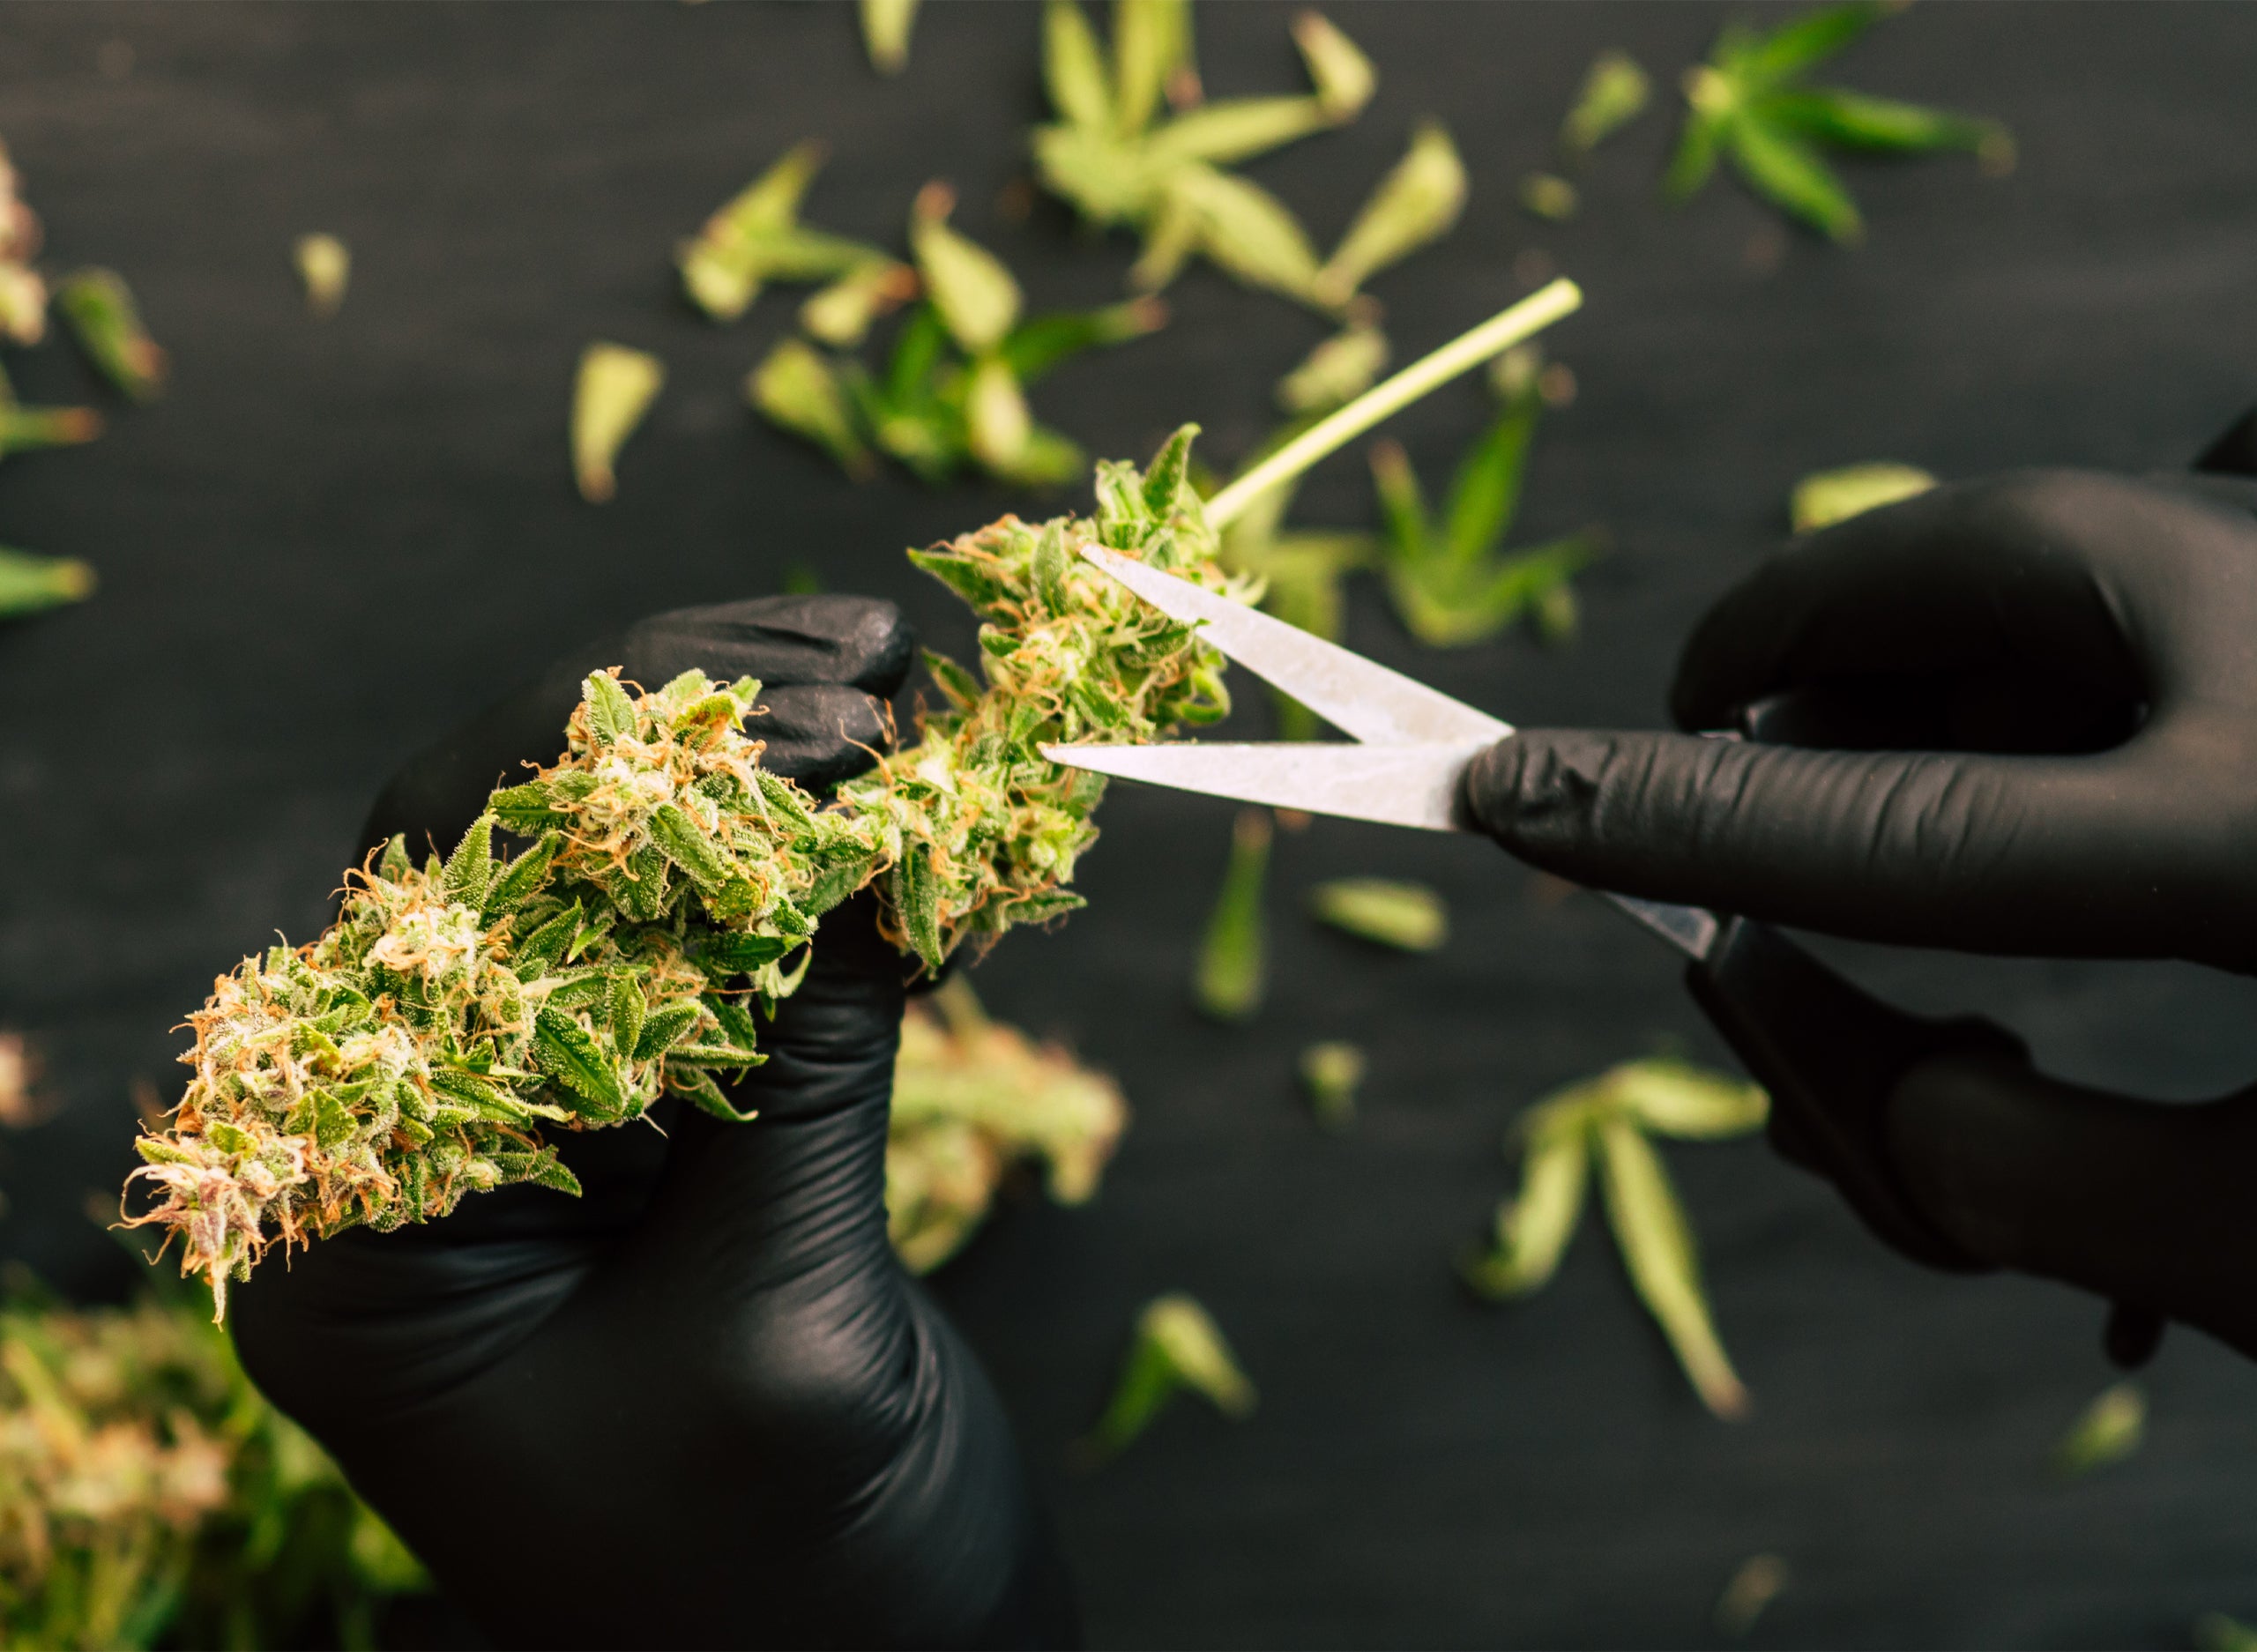 Croptober: What is it and How to Prepare as a Cannabis Business